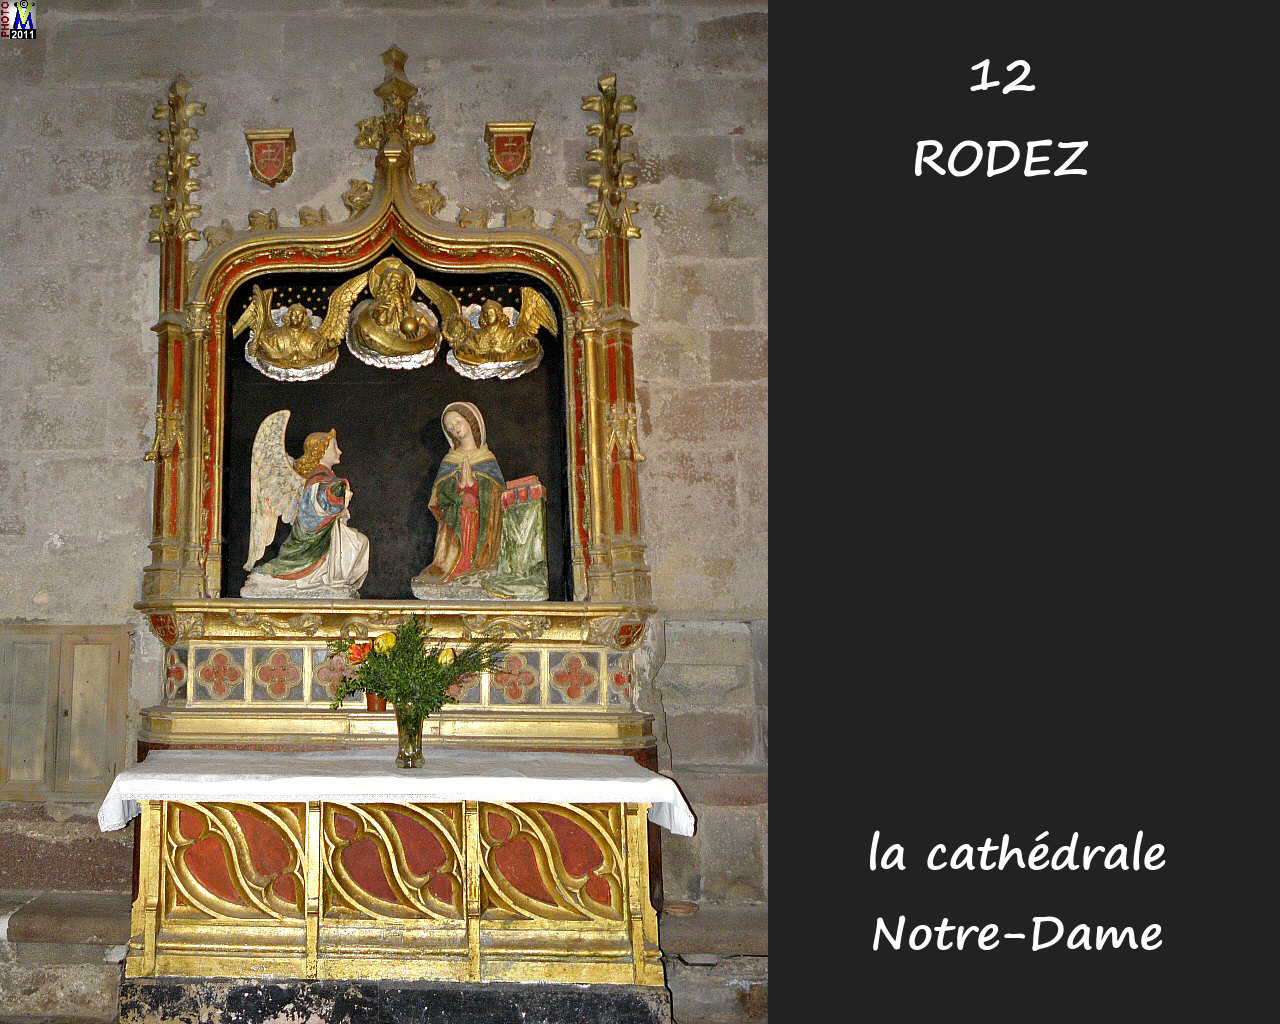 12RODEZ_cathedrale_224.jpg